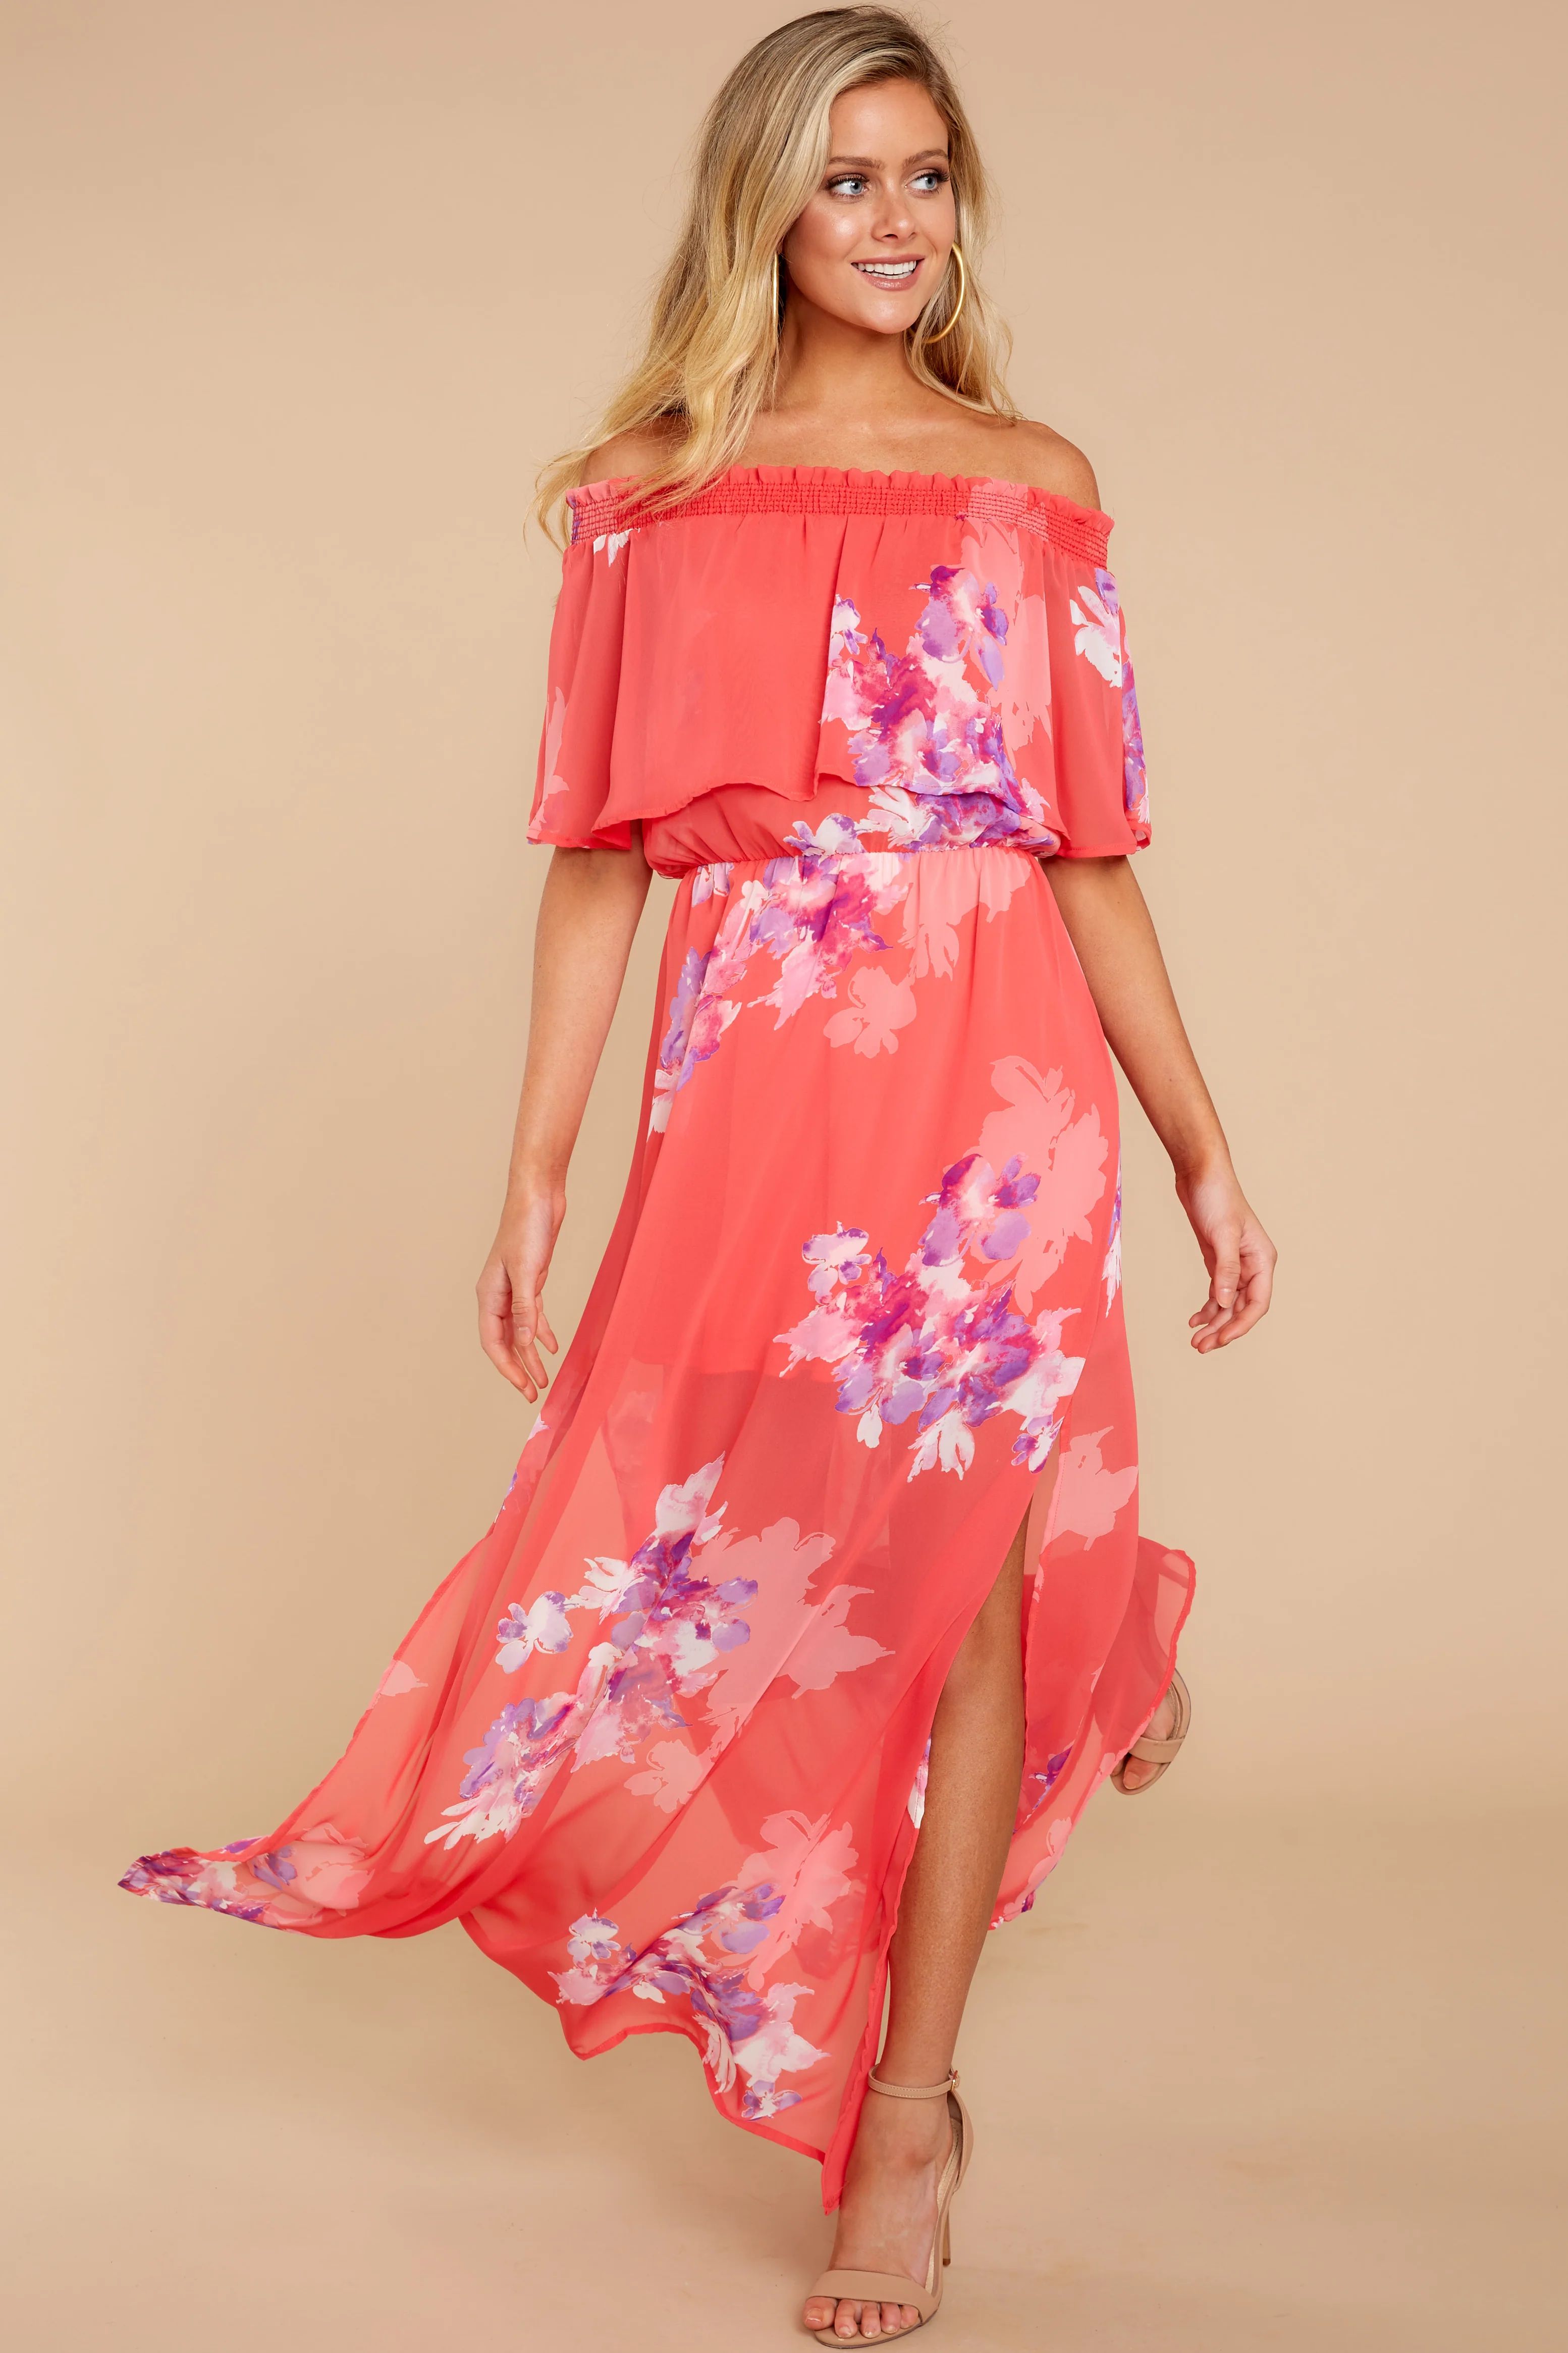 Meet Me There Pink Floral Print Maxi Dress | Red Dress 